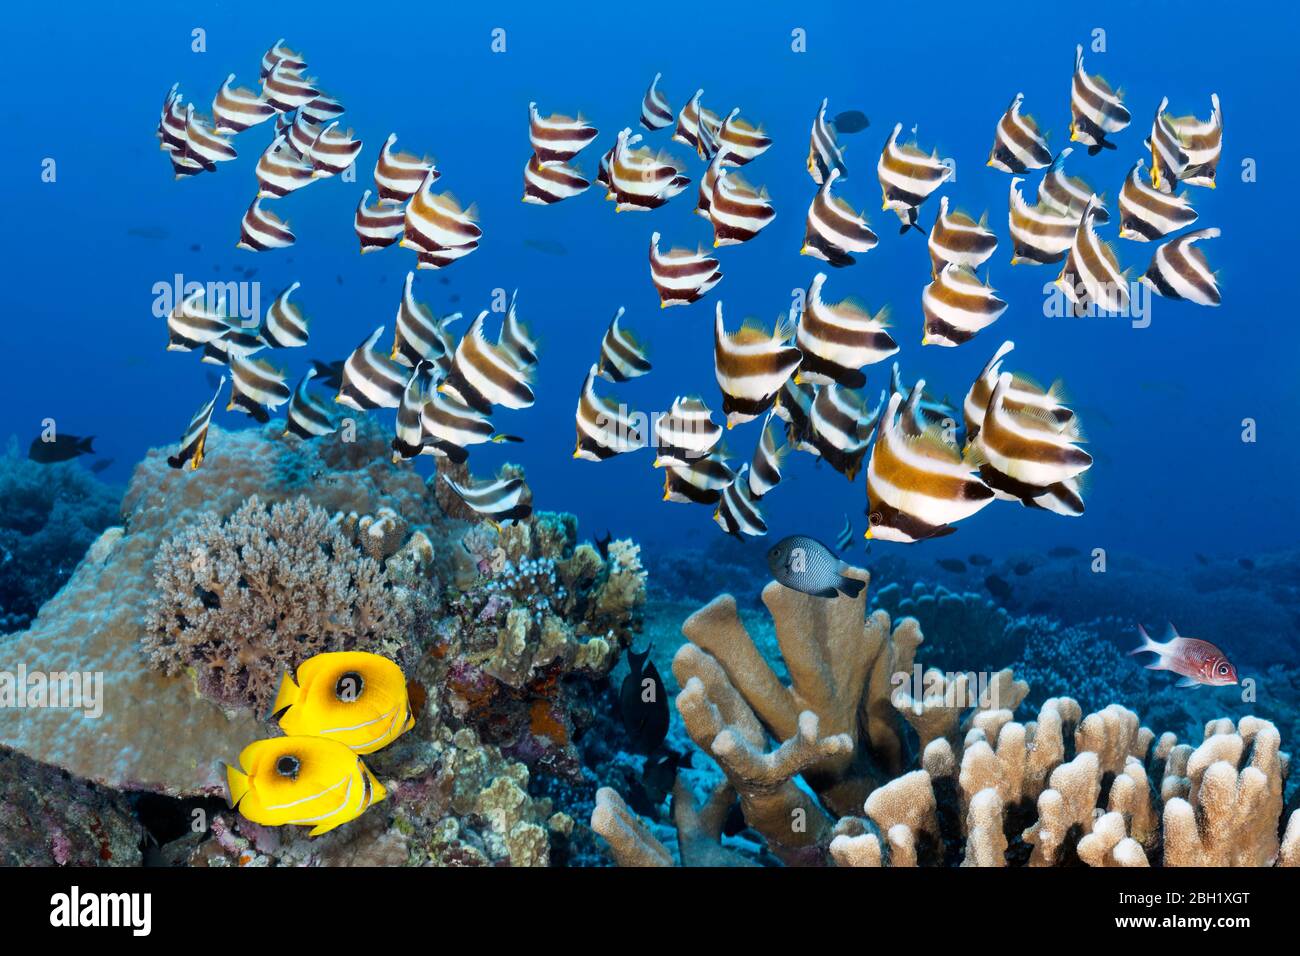 Swarm of fish Pacific bannerfish (Heniochus chrysostomus), pair of Bennetts butterflyfish (Chaetodon bennetti) swimming over coral reef, Pacific Stock Photo